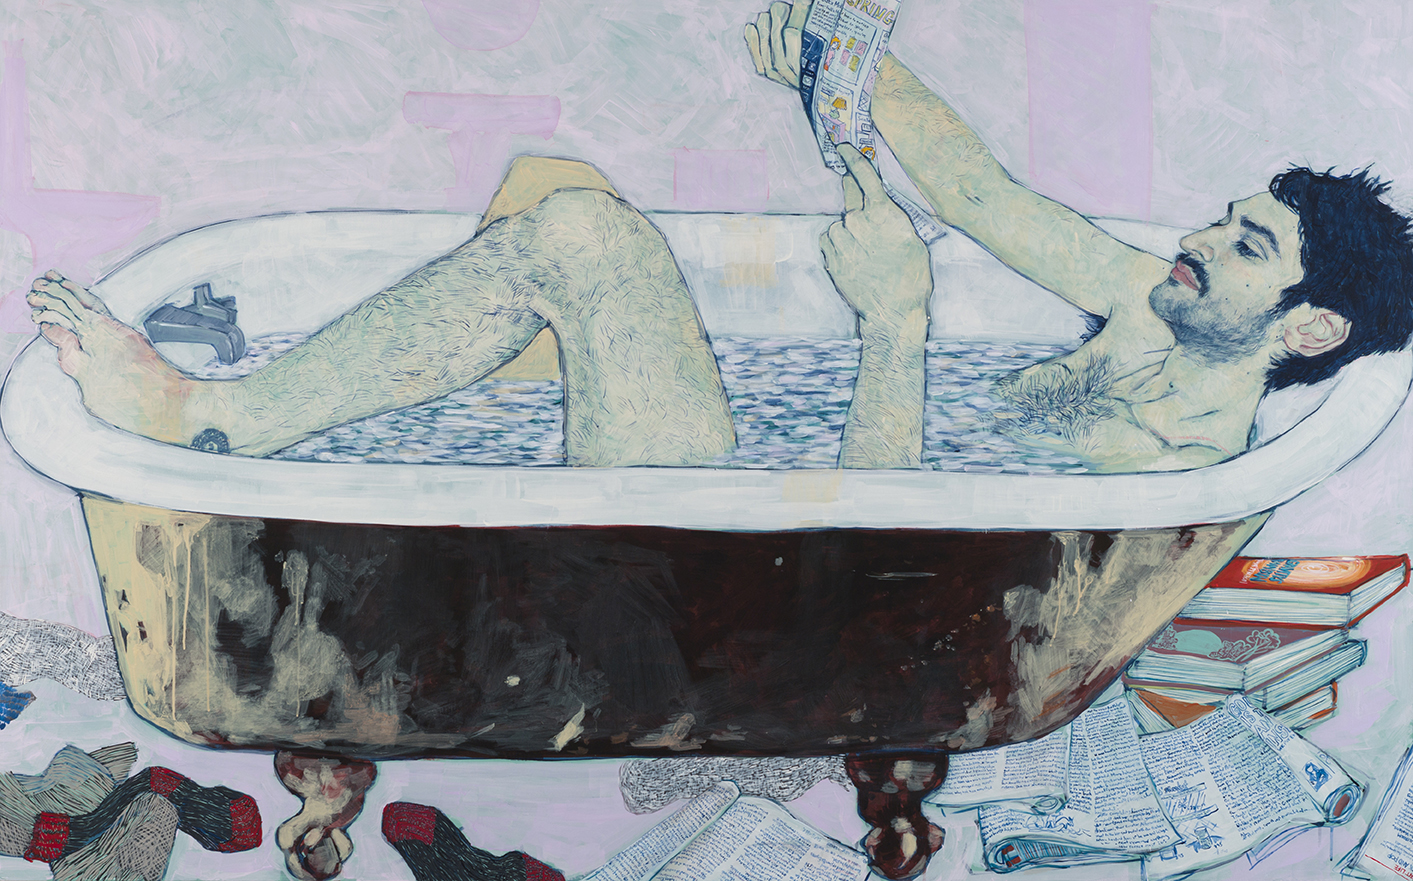 Freelancer (Mikey Hernandez) - Painting by Hope Gangloff